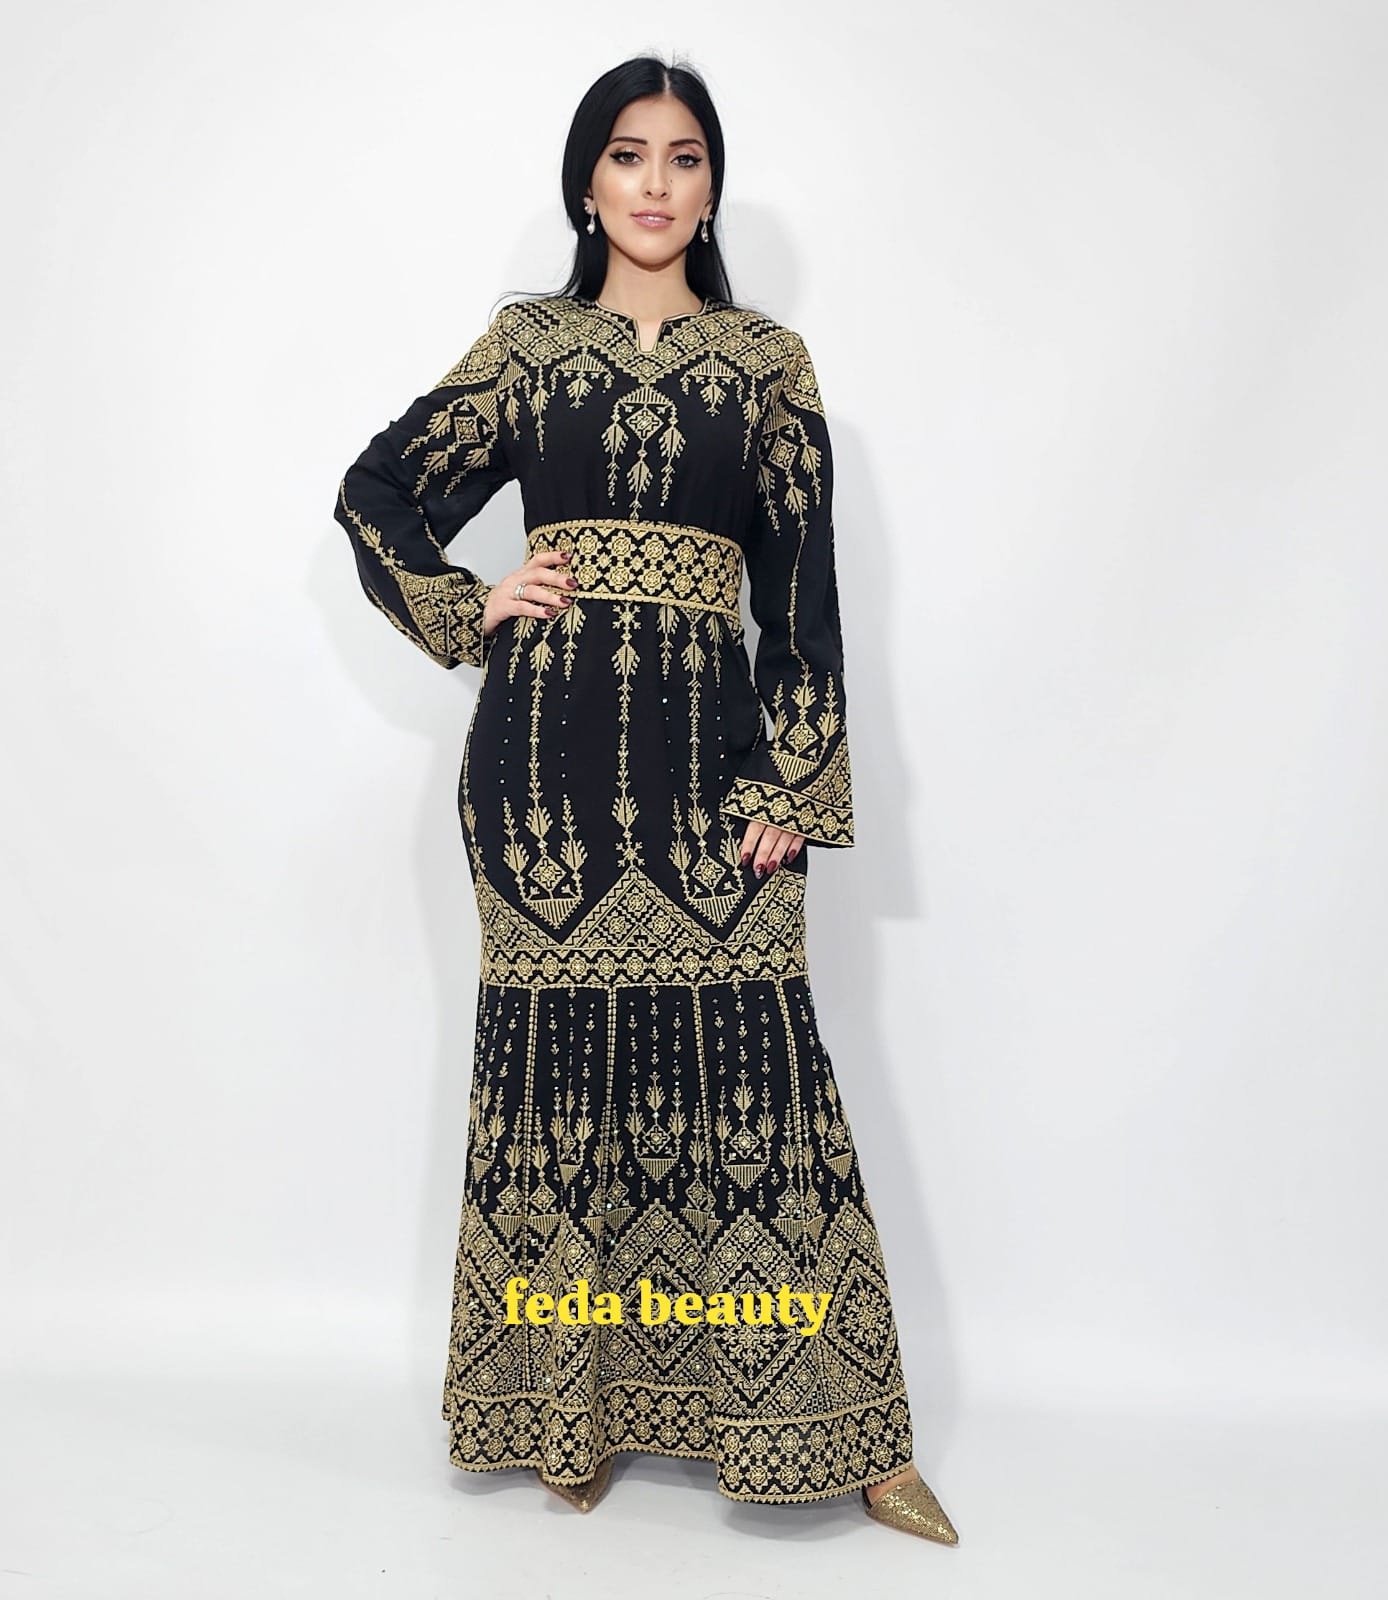 An embroidered dress from Fida Beauty's new collection for the year 2023